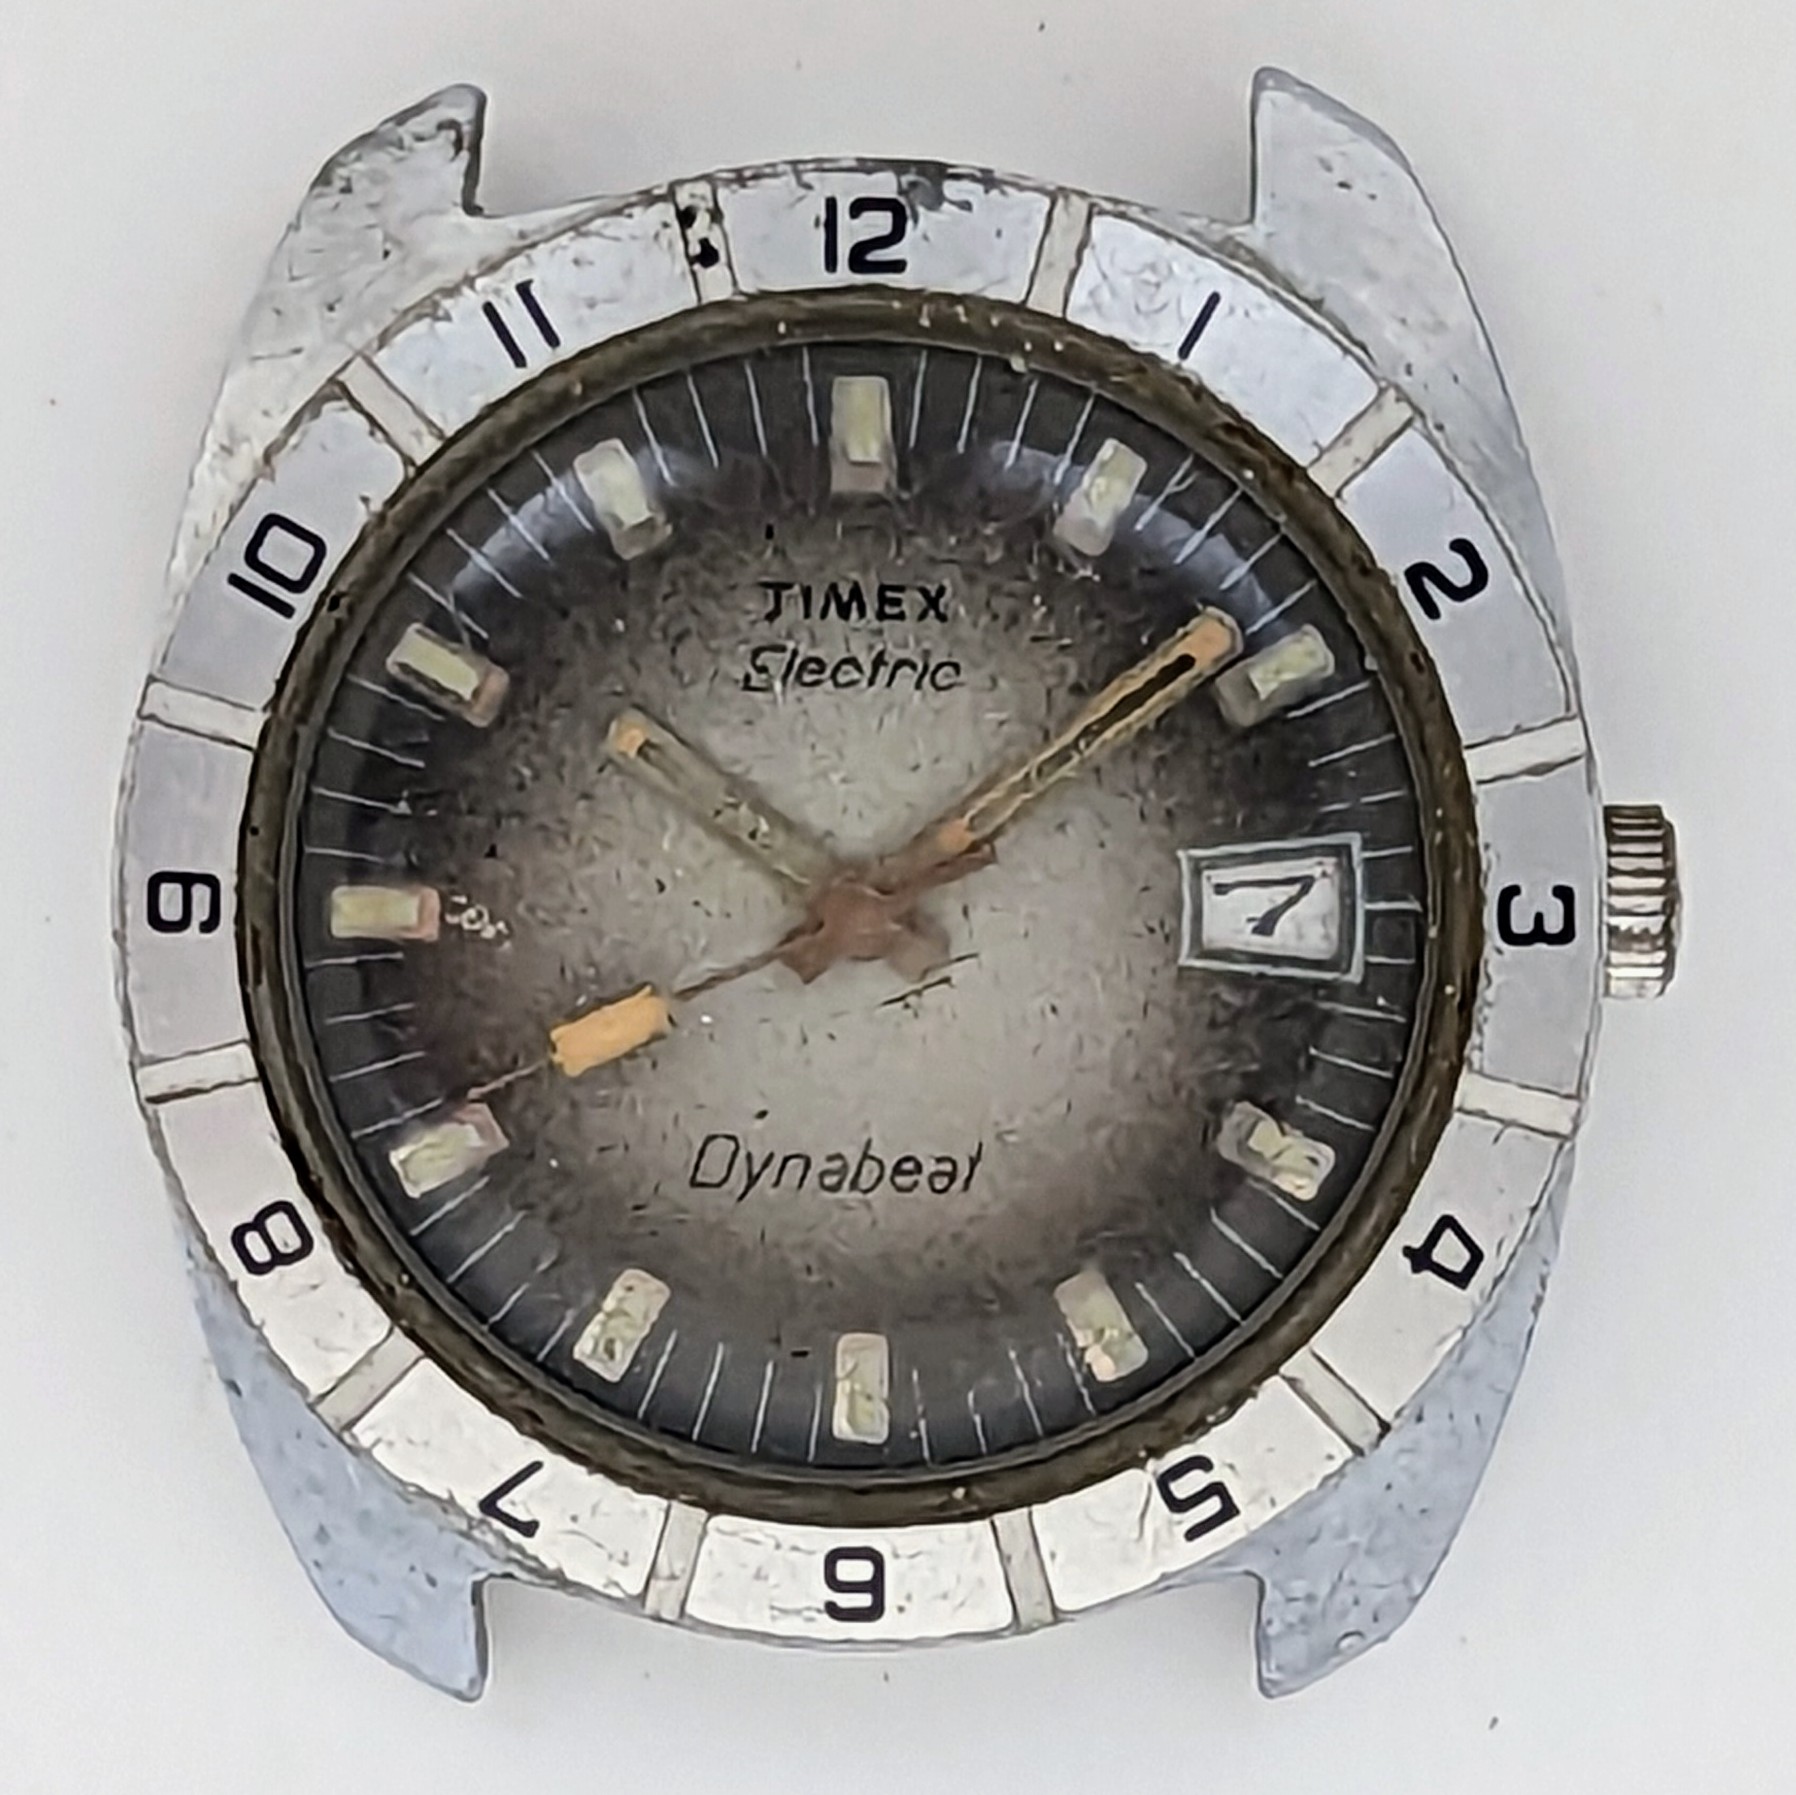 Timex Electric Dynabeat Dive Watch 1975 Ref. 76771 25475